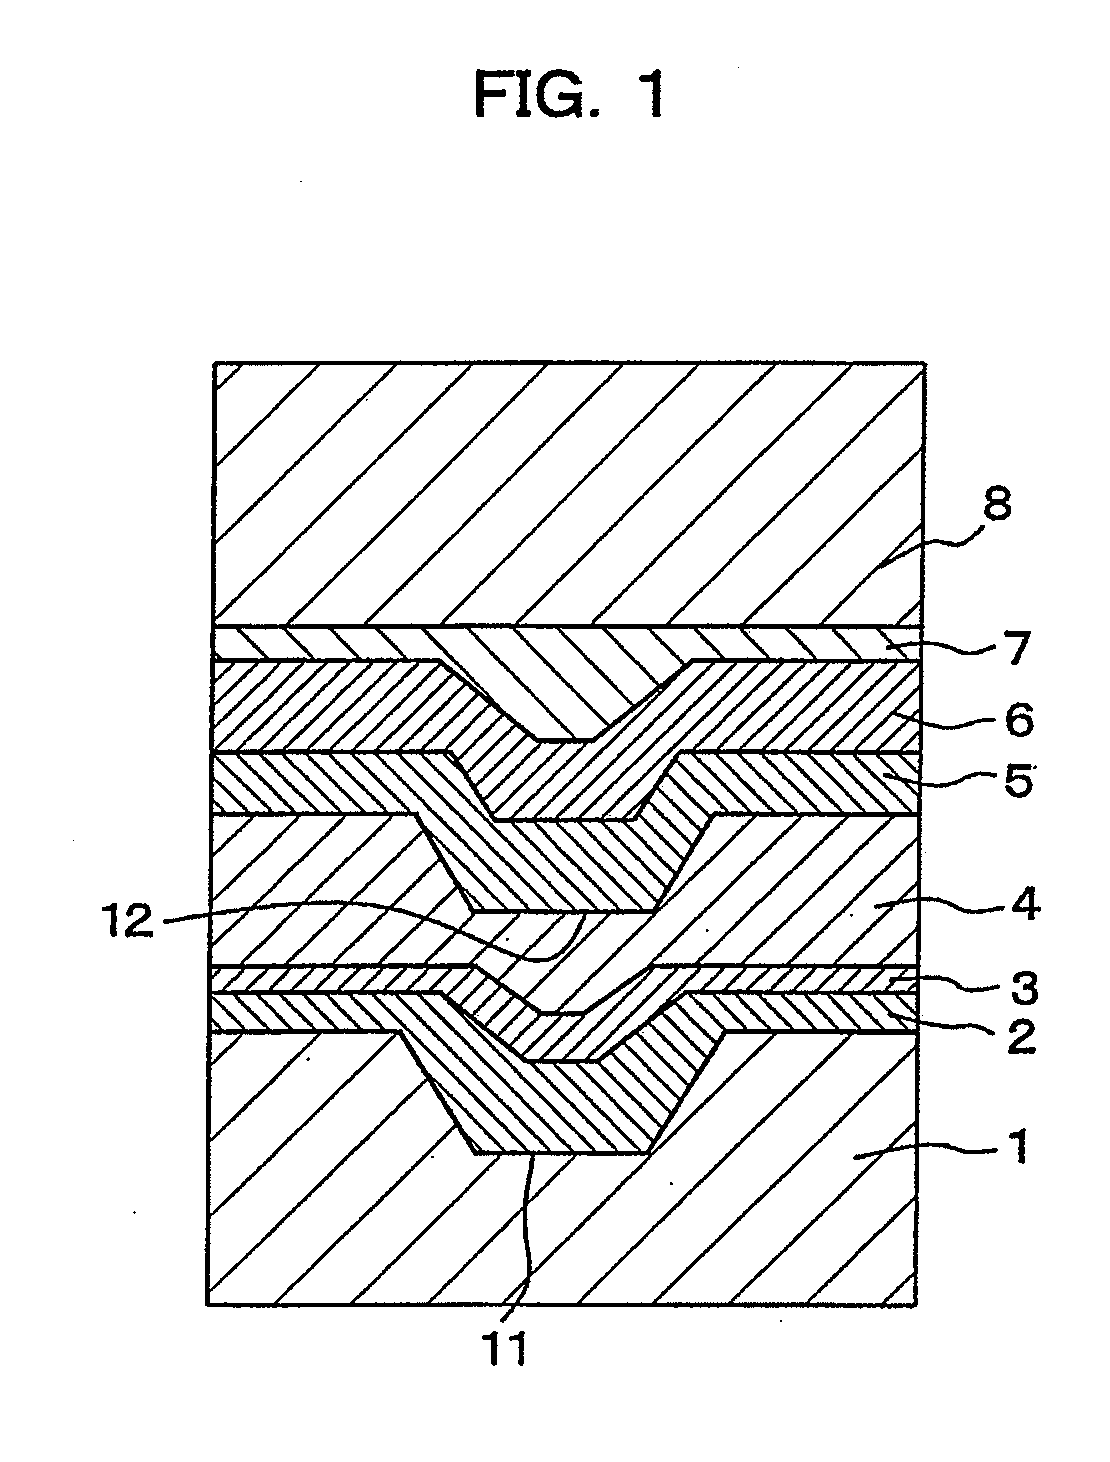 Recording/reading method for an optical recording medium using an irradiating a laser beam